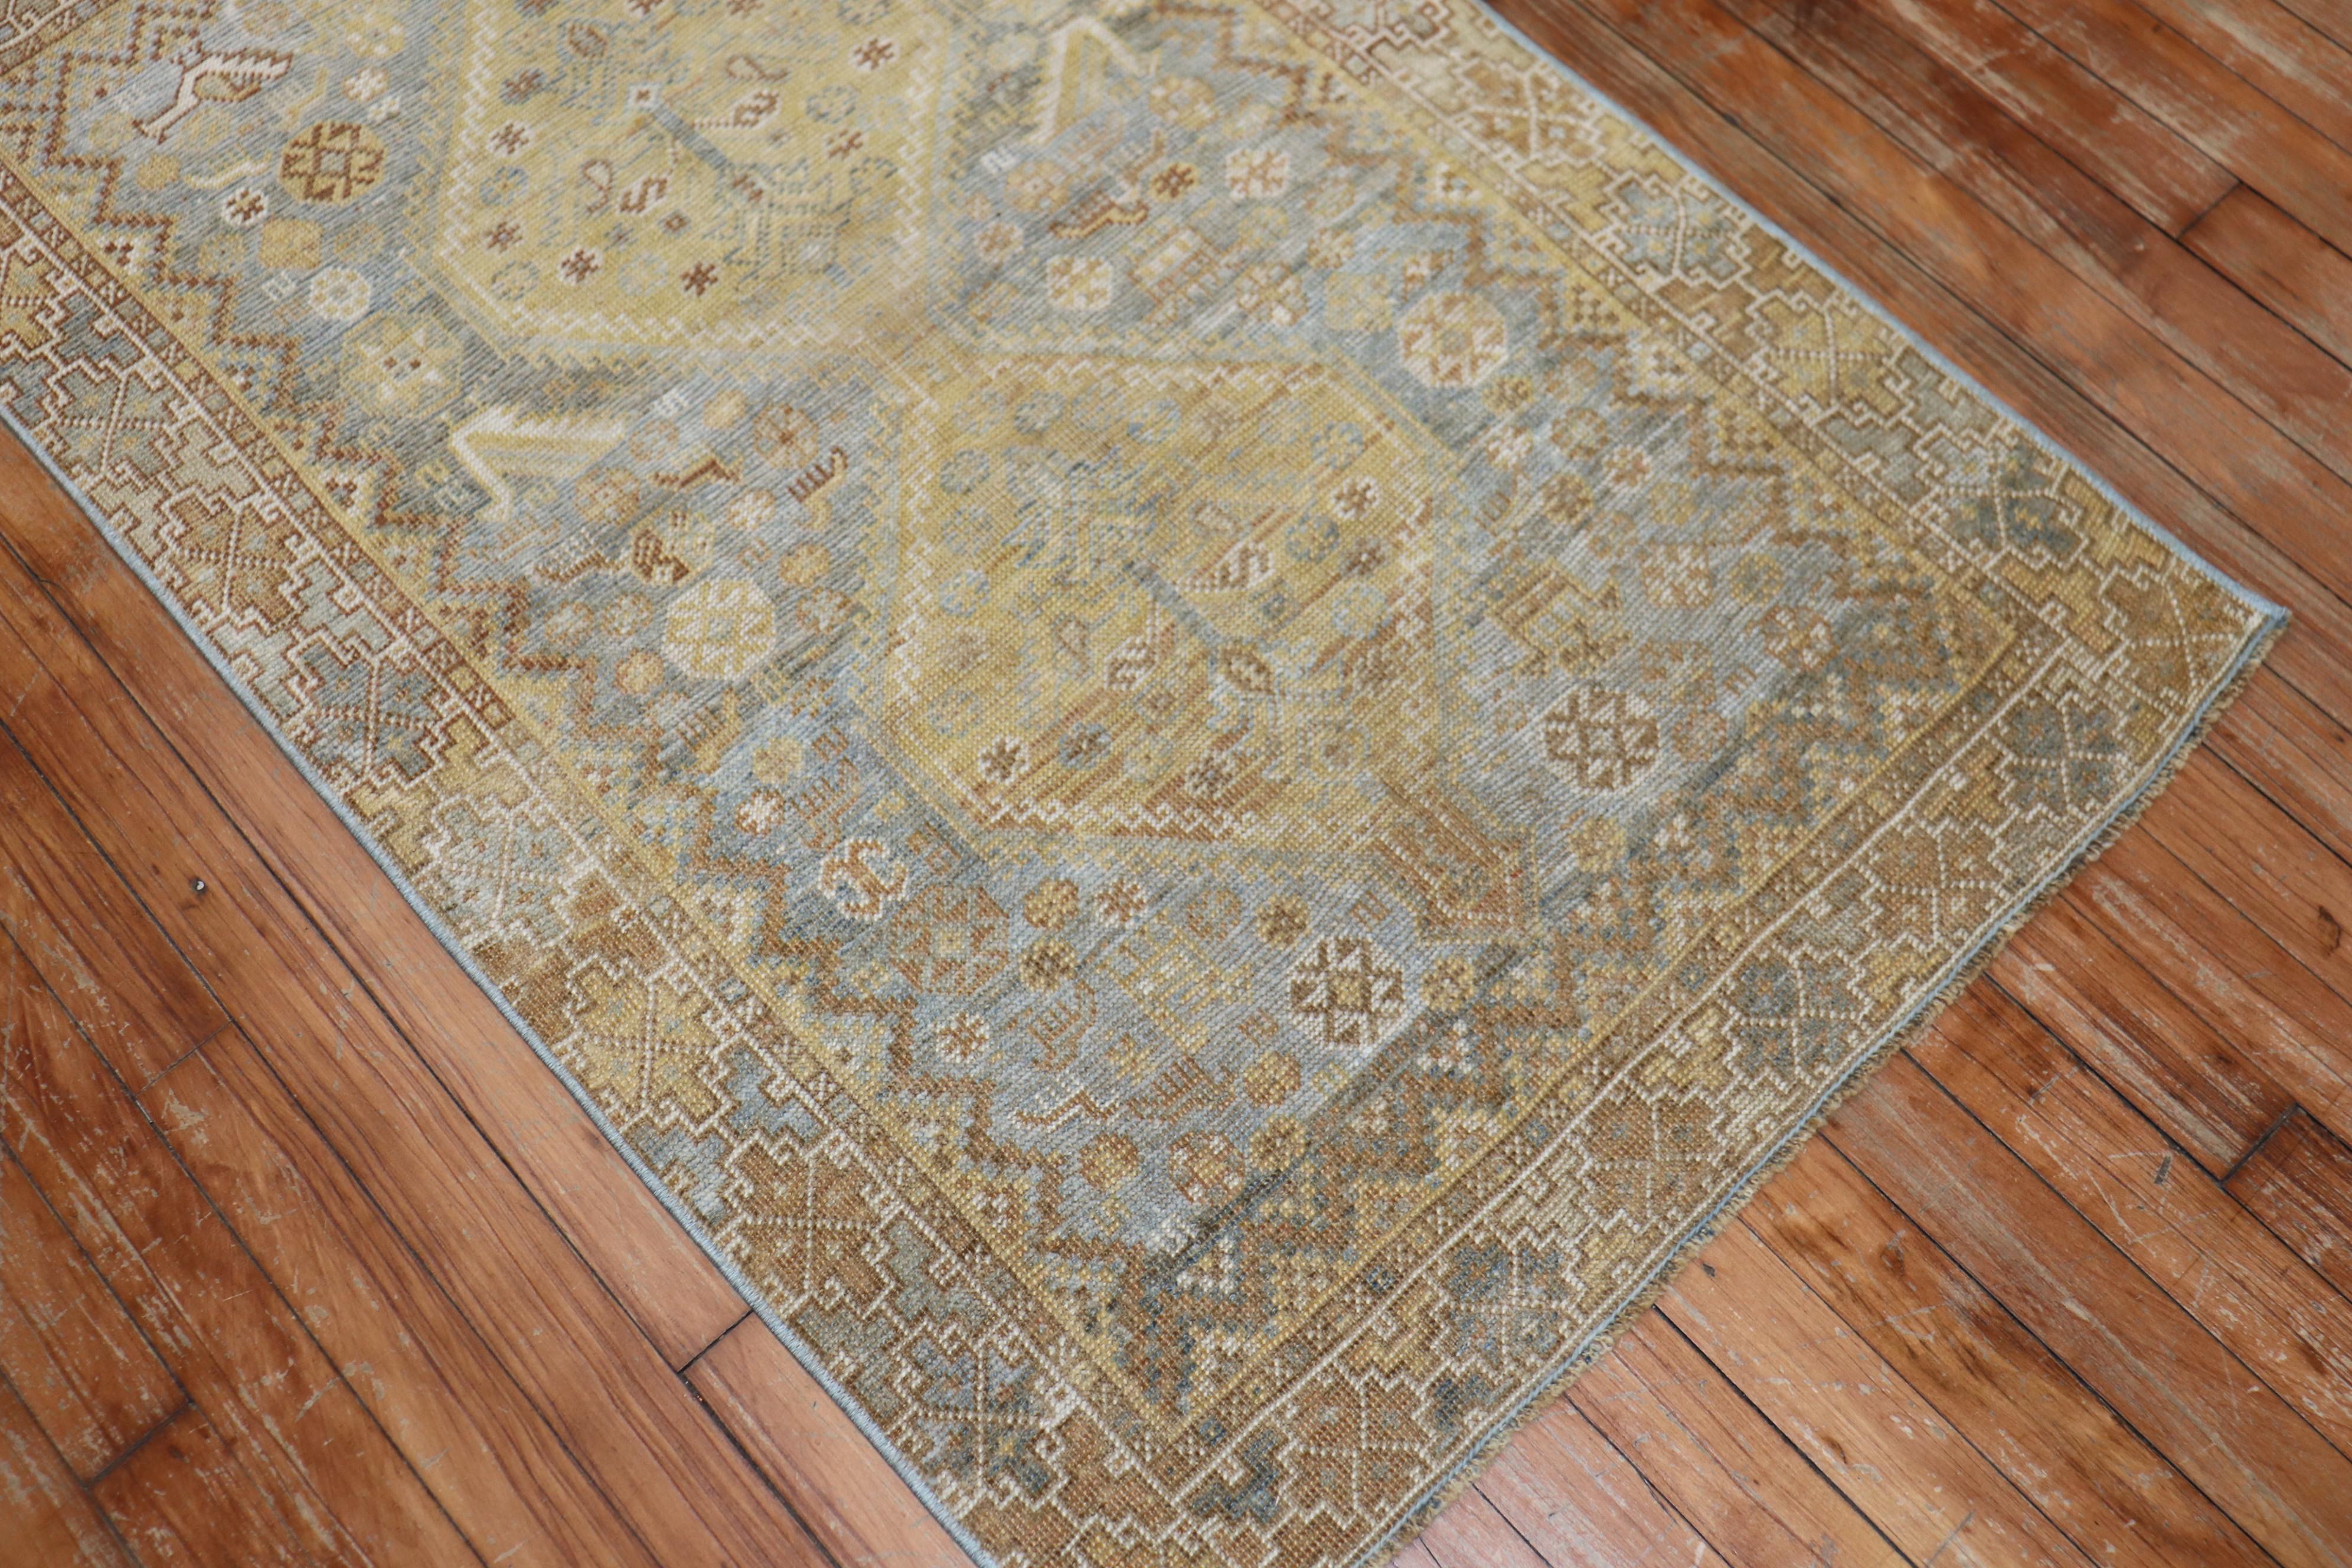 an early 20th Century Persian Tribal Shiraz Rug with yellow and brown accents on a light blue field

Measures: 2'7'' x 4'1''.